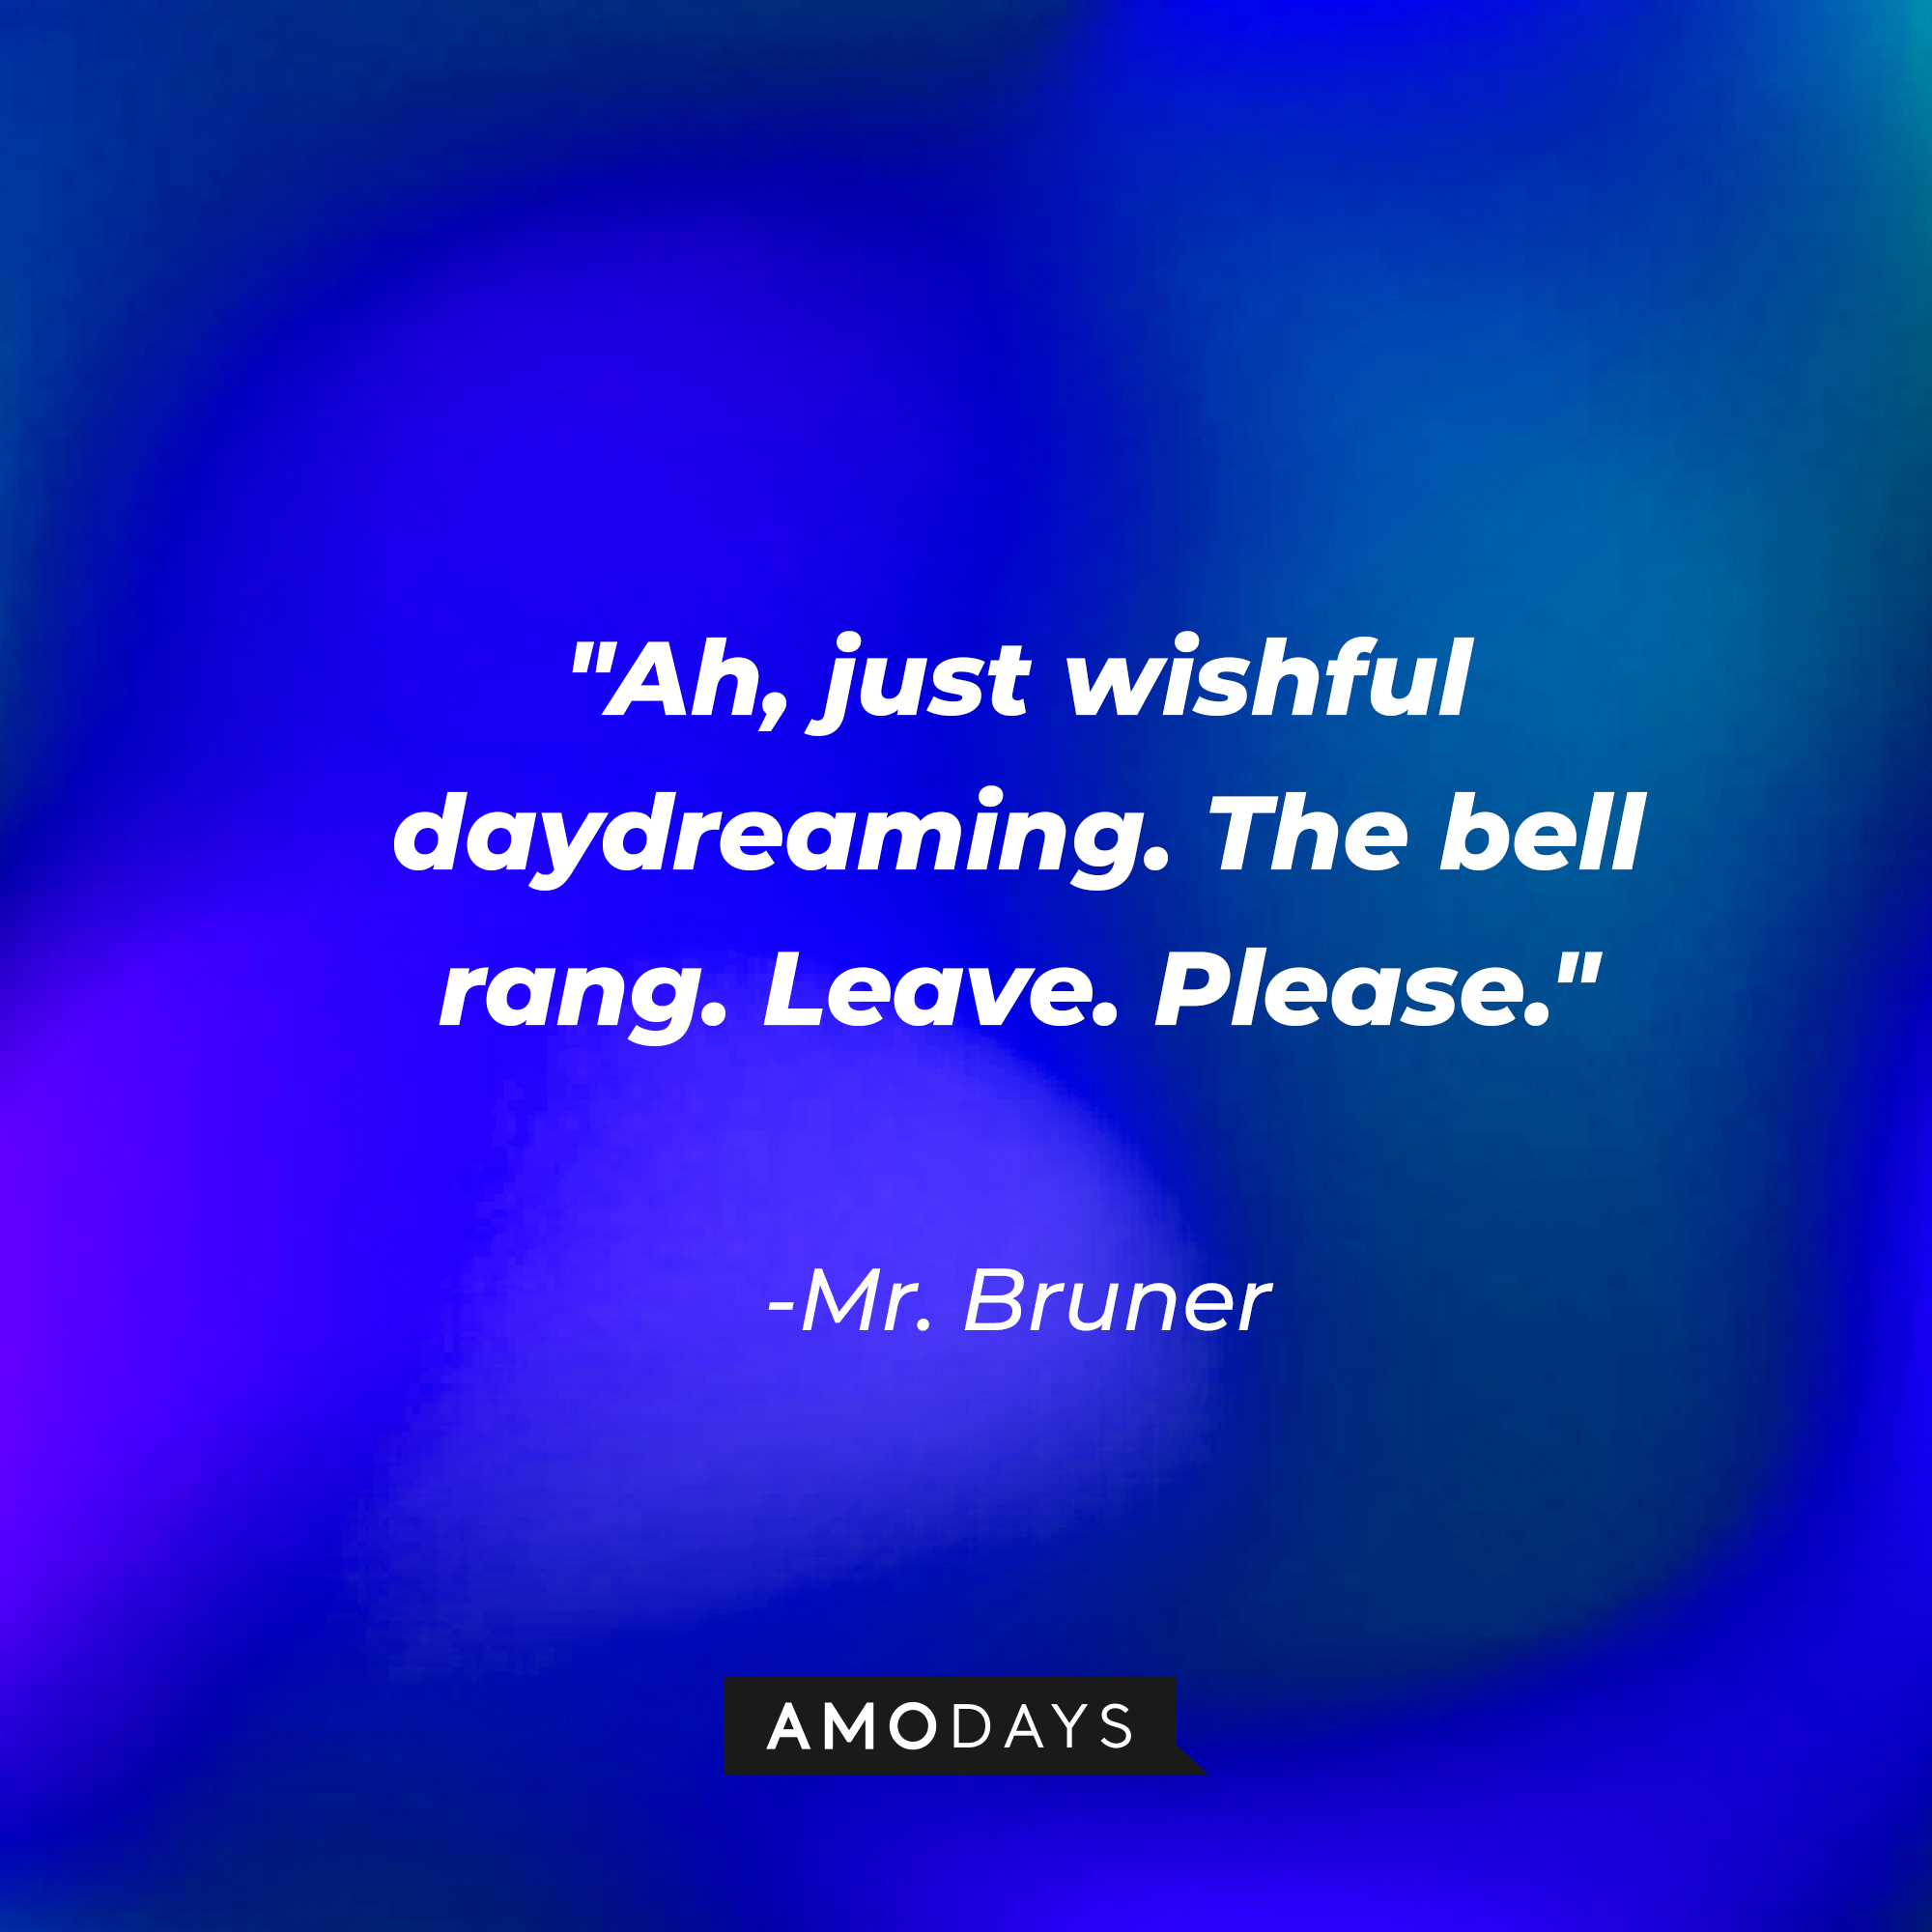 Mr. Bruner's quote: "Ah, just wishful daydreaming. The bell rang. Leave. Please." | Source: AmoDays